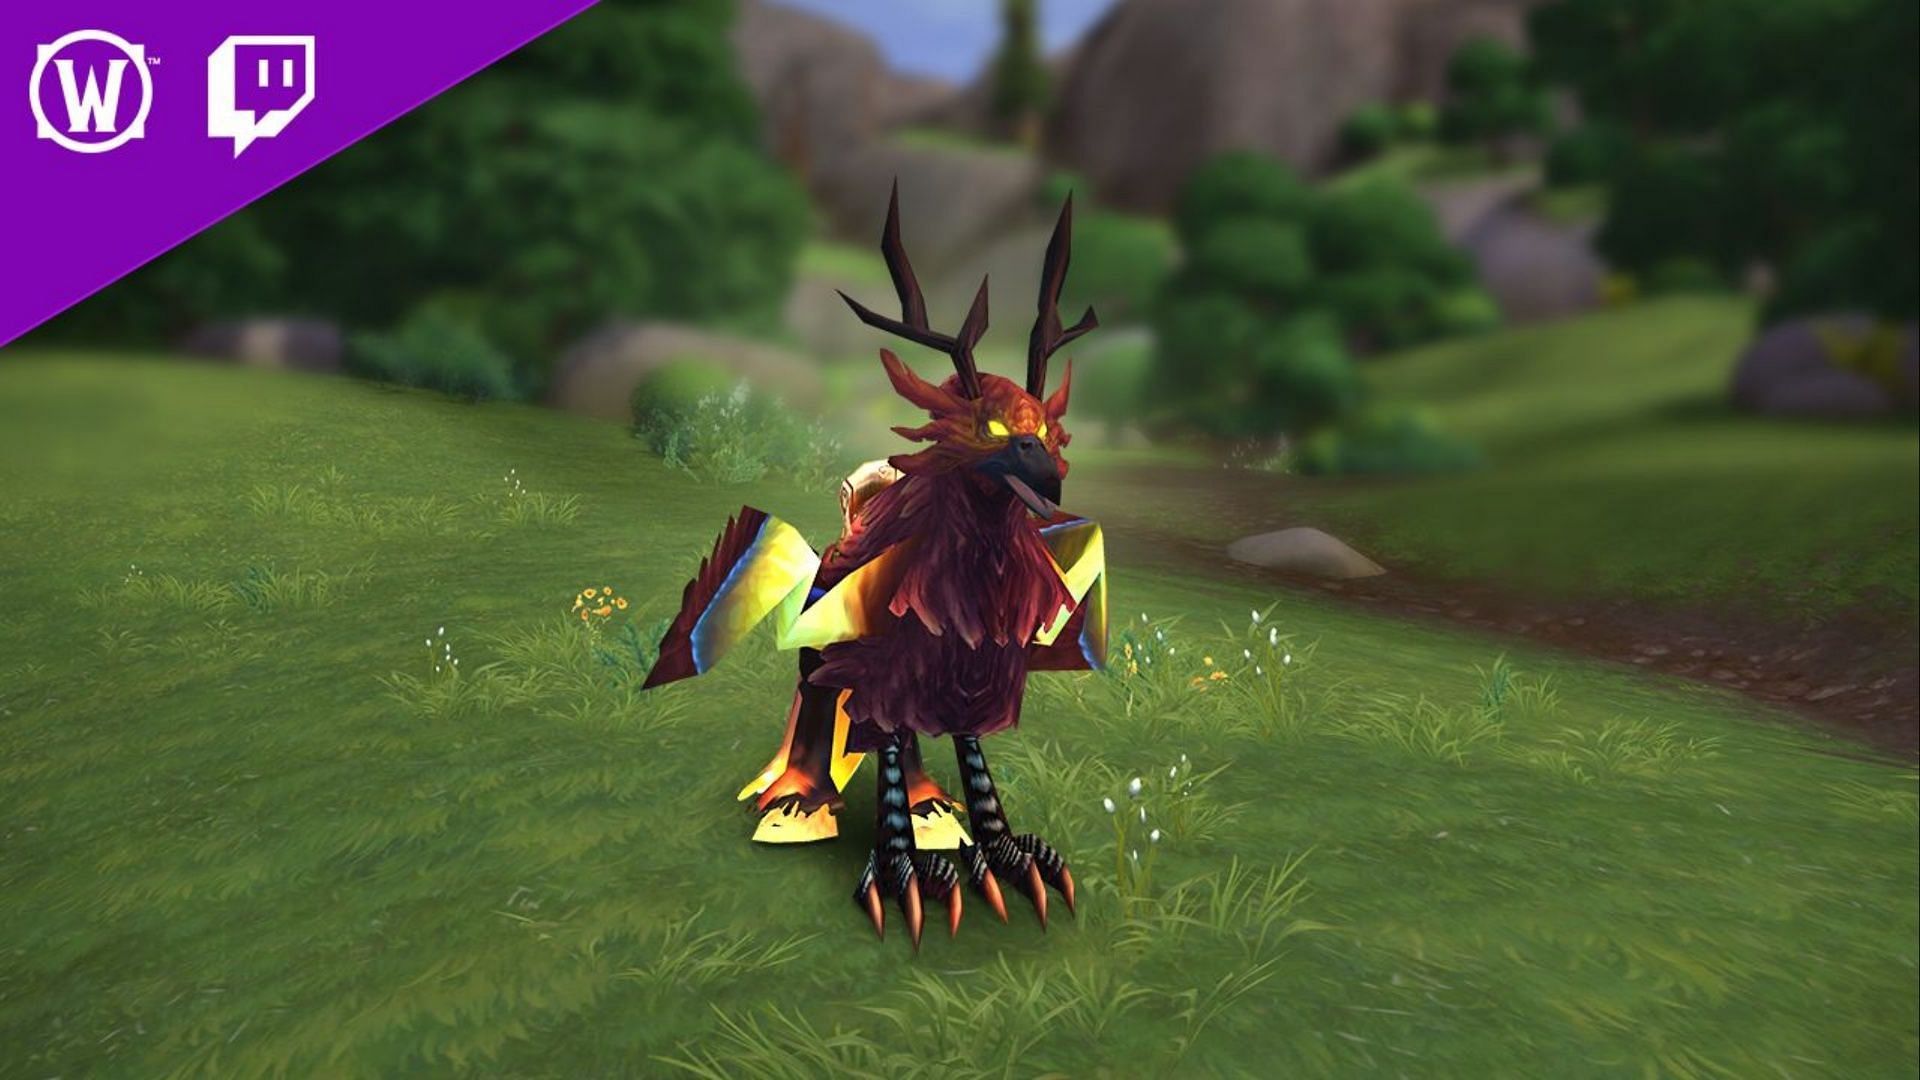 Starting today, you can unlock the Blazing Hippogryph for free.